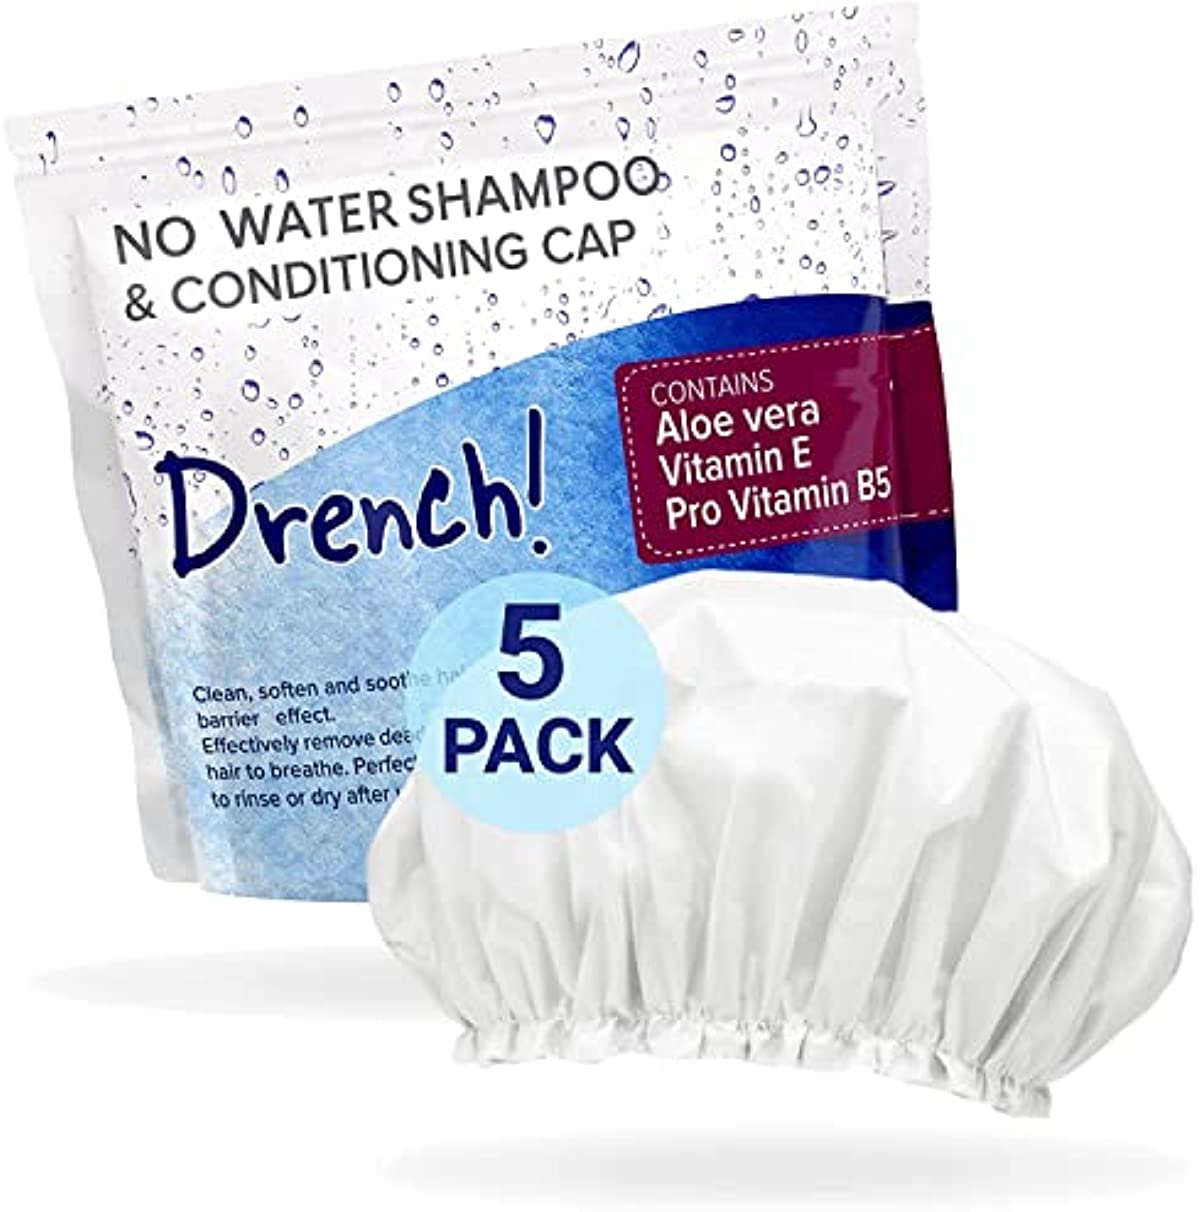 Drench No Water Rinse Free Shampoo Caps [5-Pack] - Waterless Shampoo and Conditioner - Dry Hair Wash Caps for Elderly or Bedridden - Contains Aloe Vera, Vitamin E and Provitamin B5